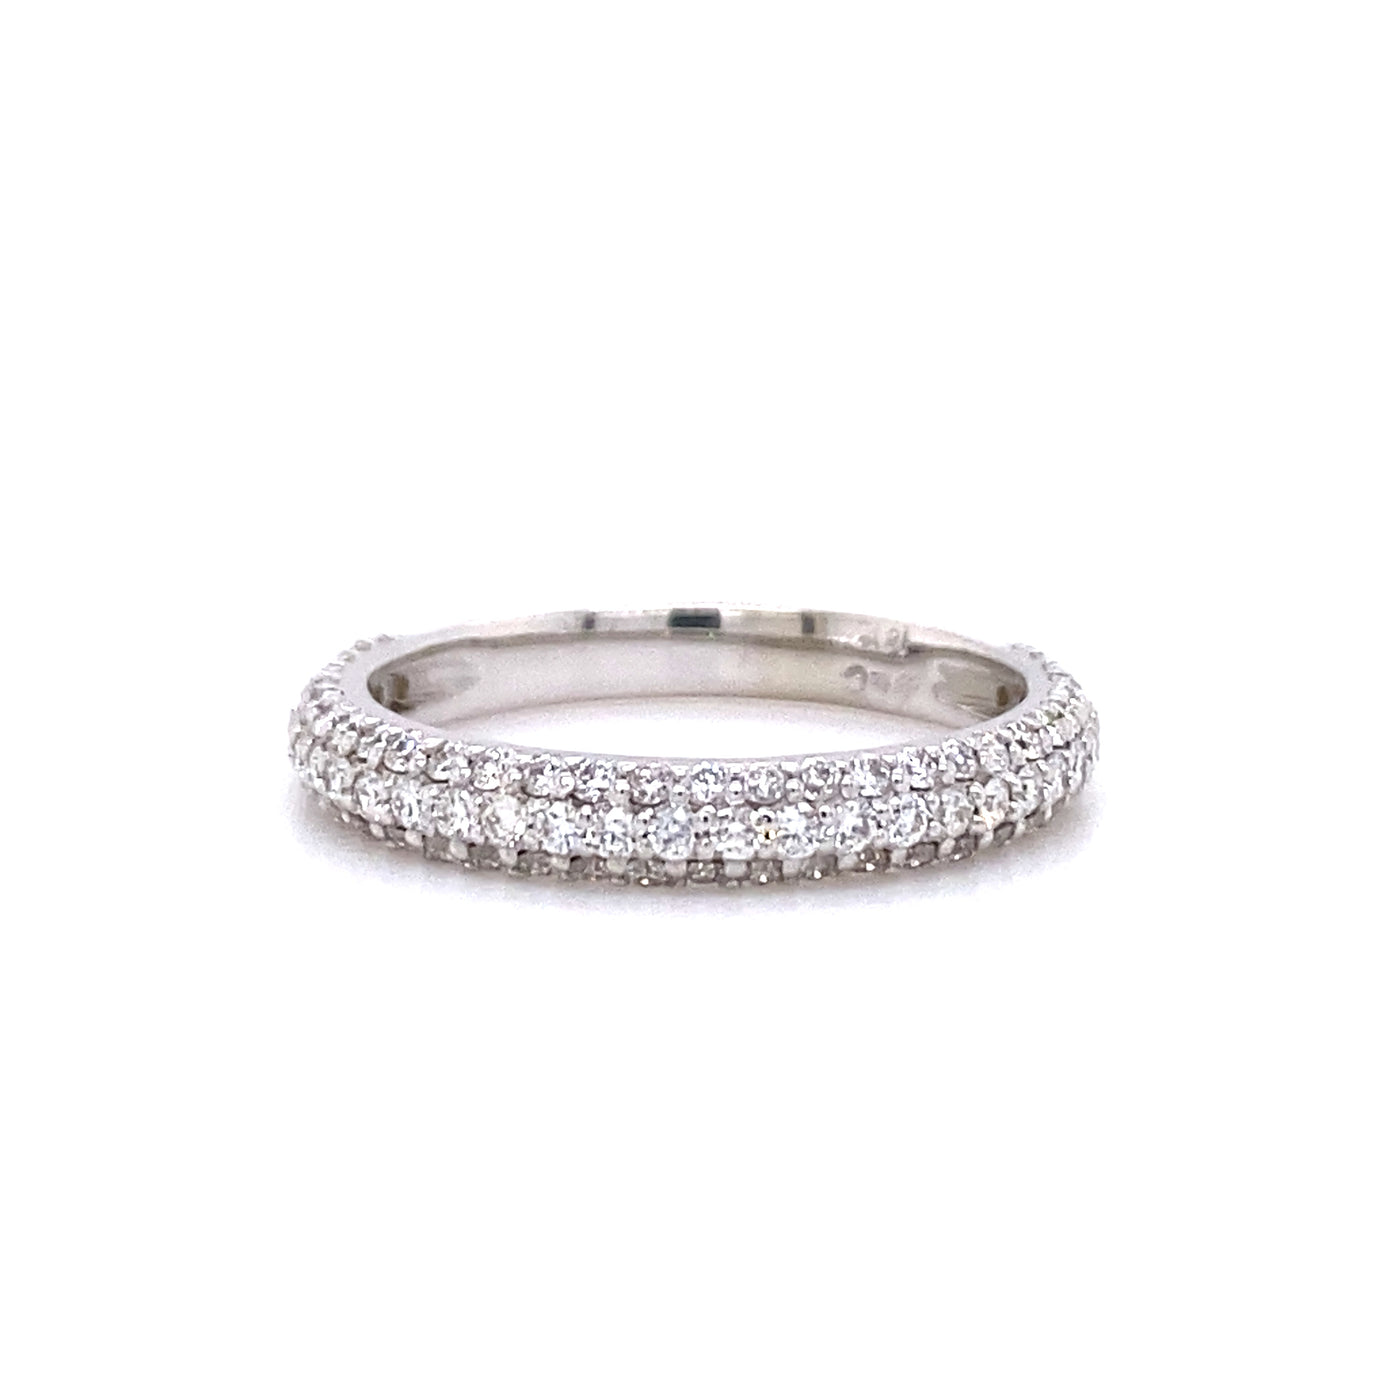 Buy Silver Rings for Women by VEMBLEY Online | Ajio.com